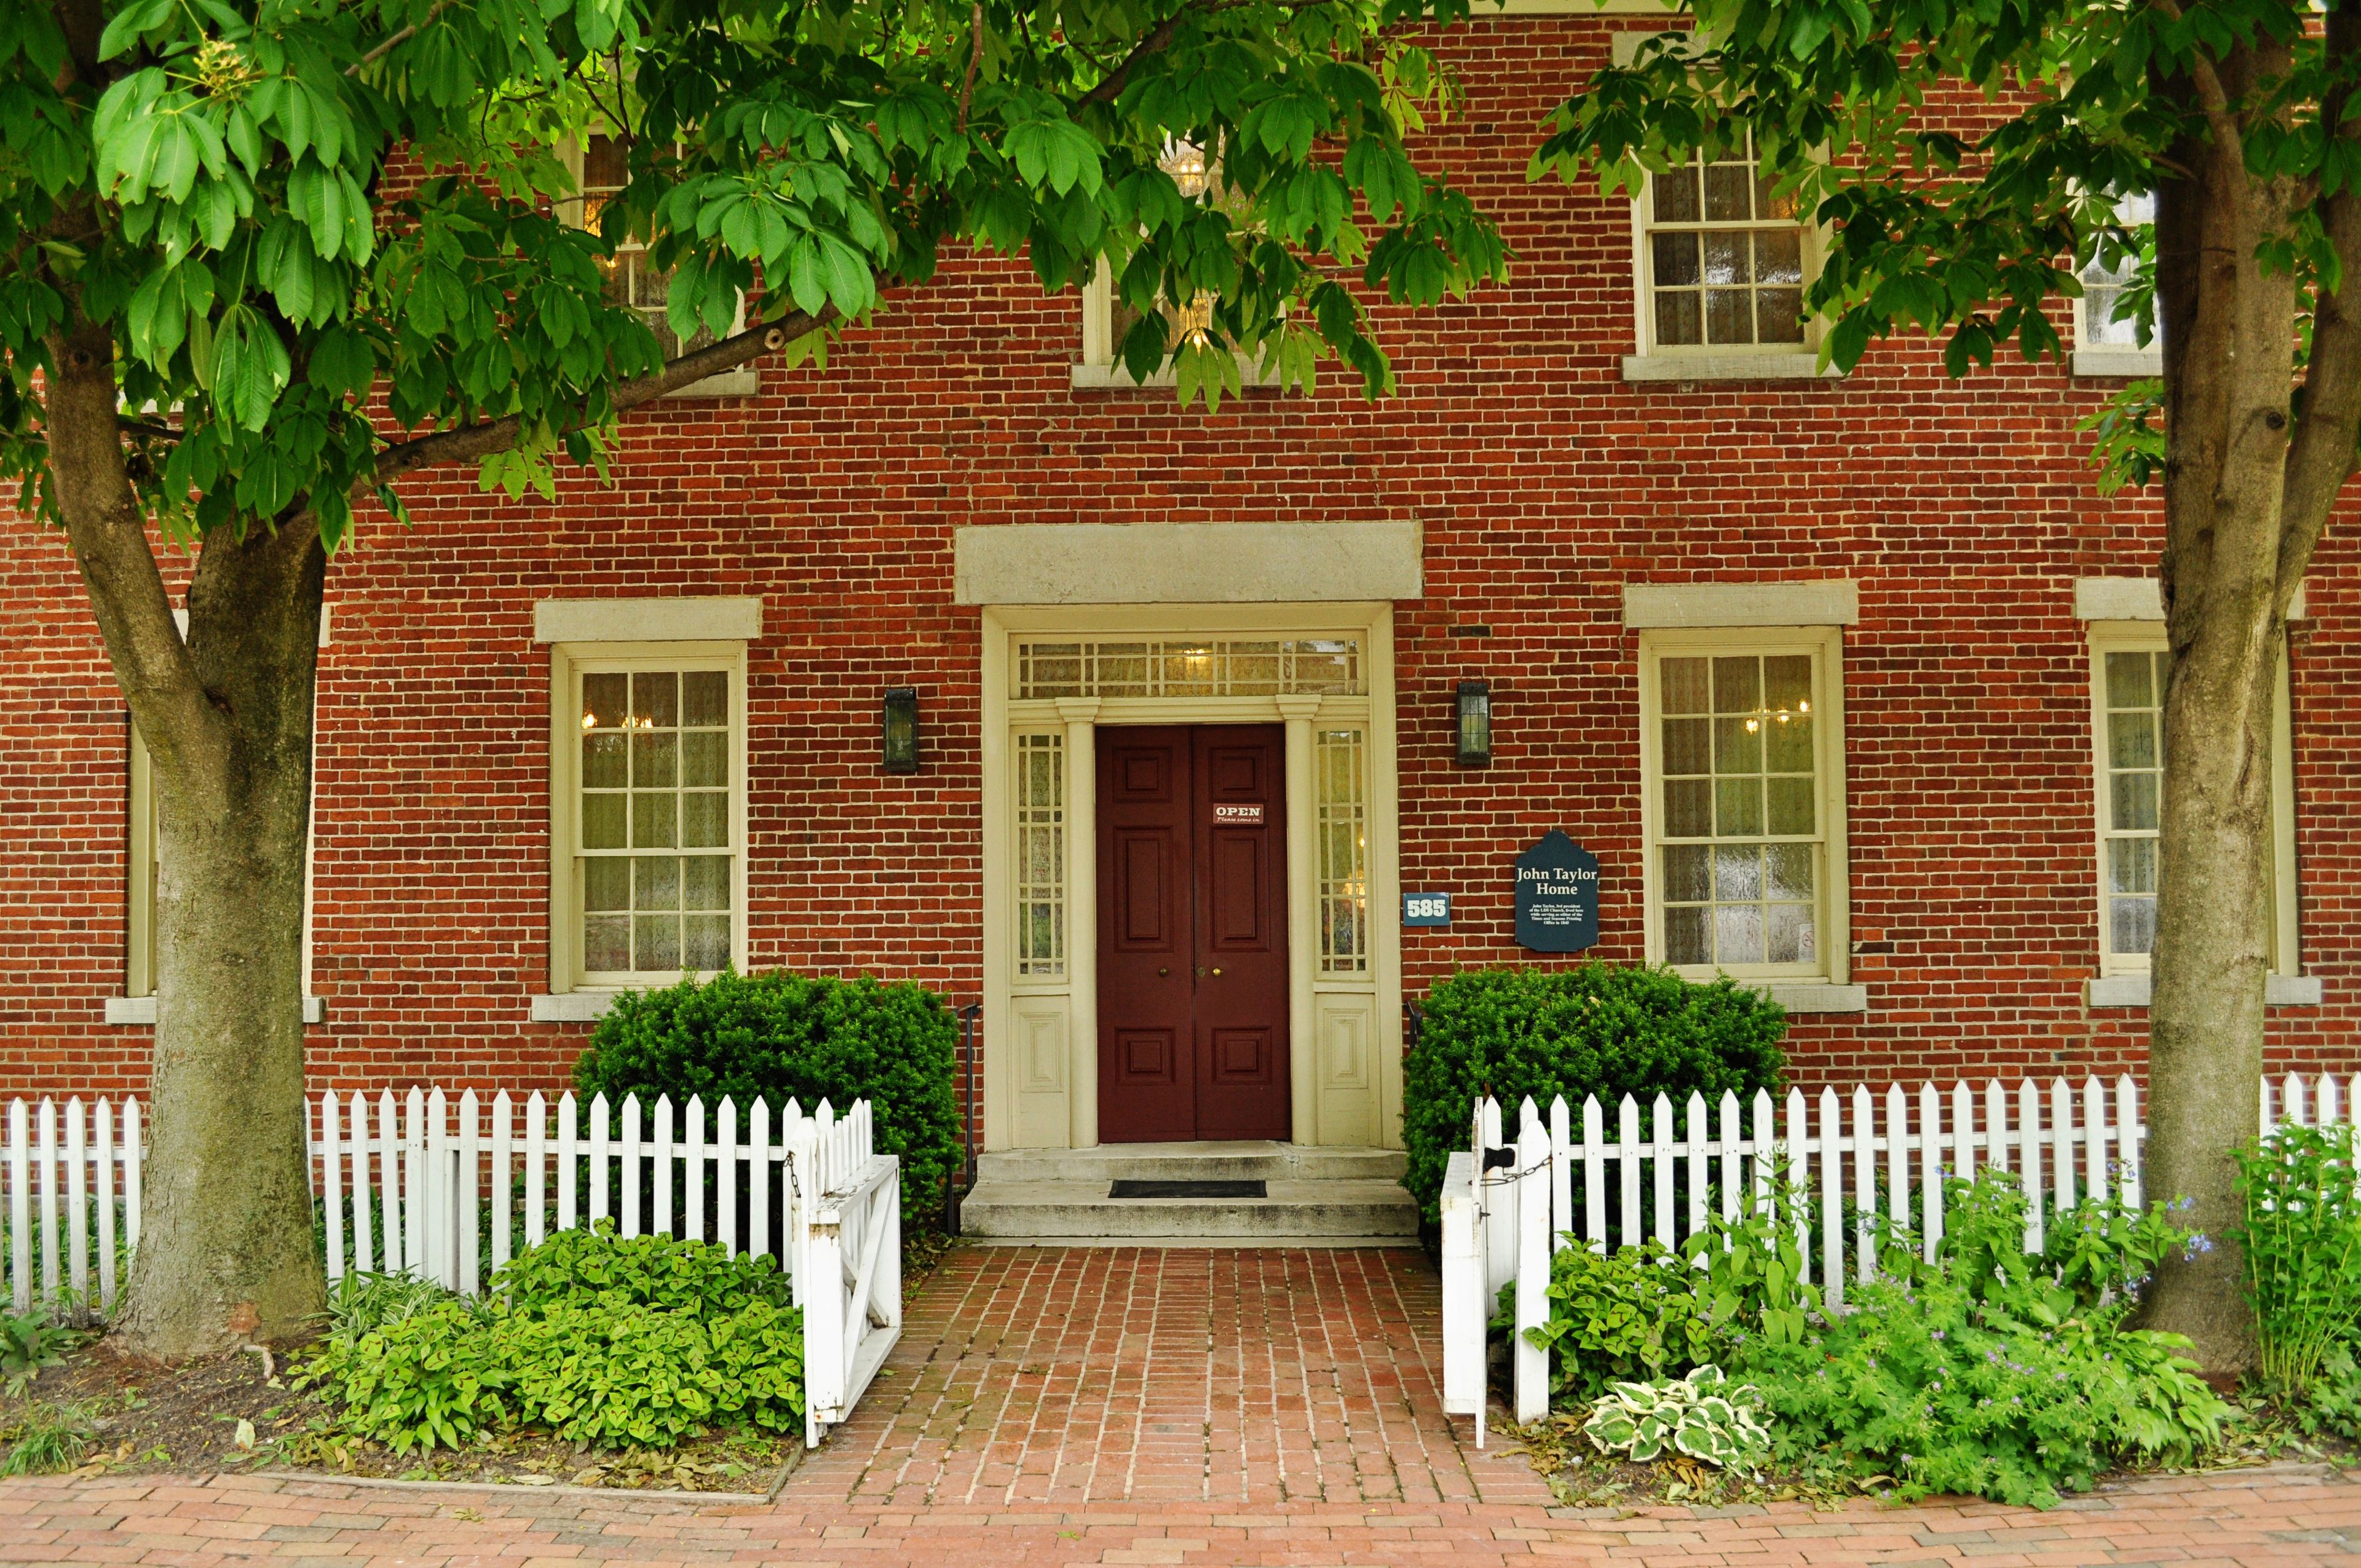 The front of the John Taylor home in Nauvoo, Illinois.